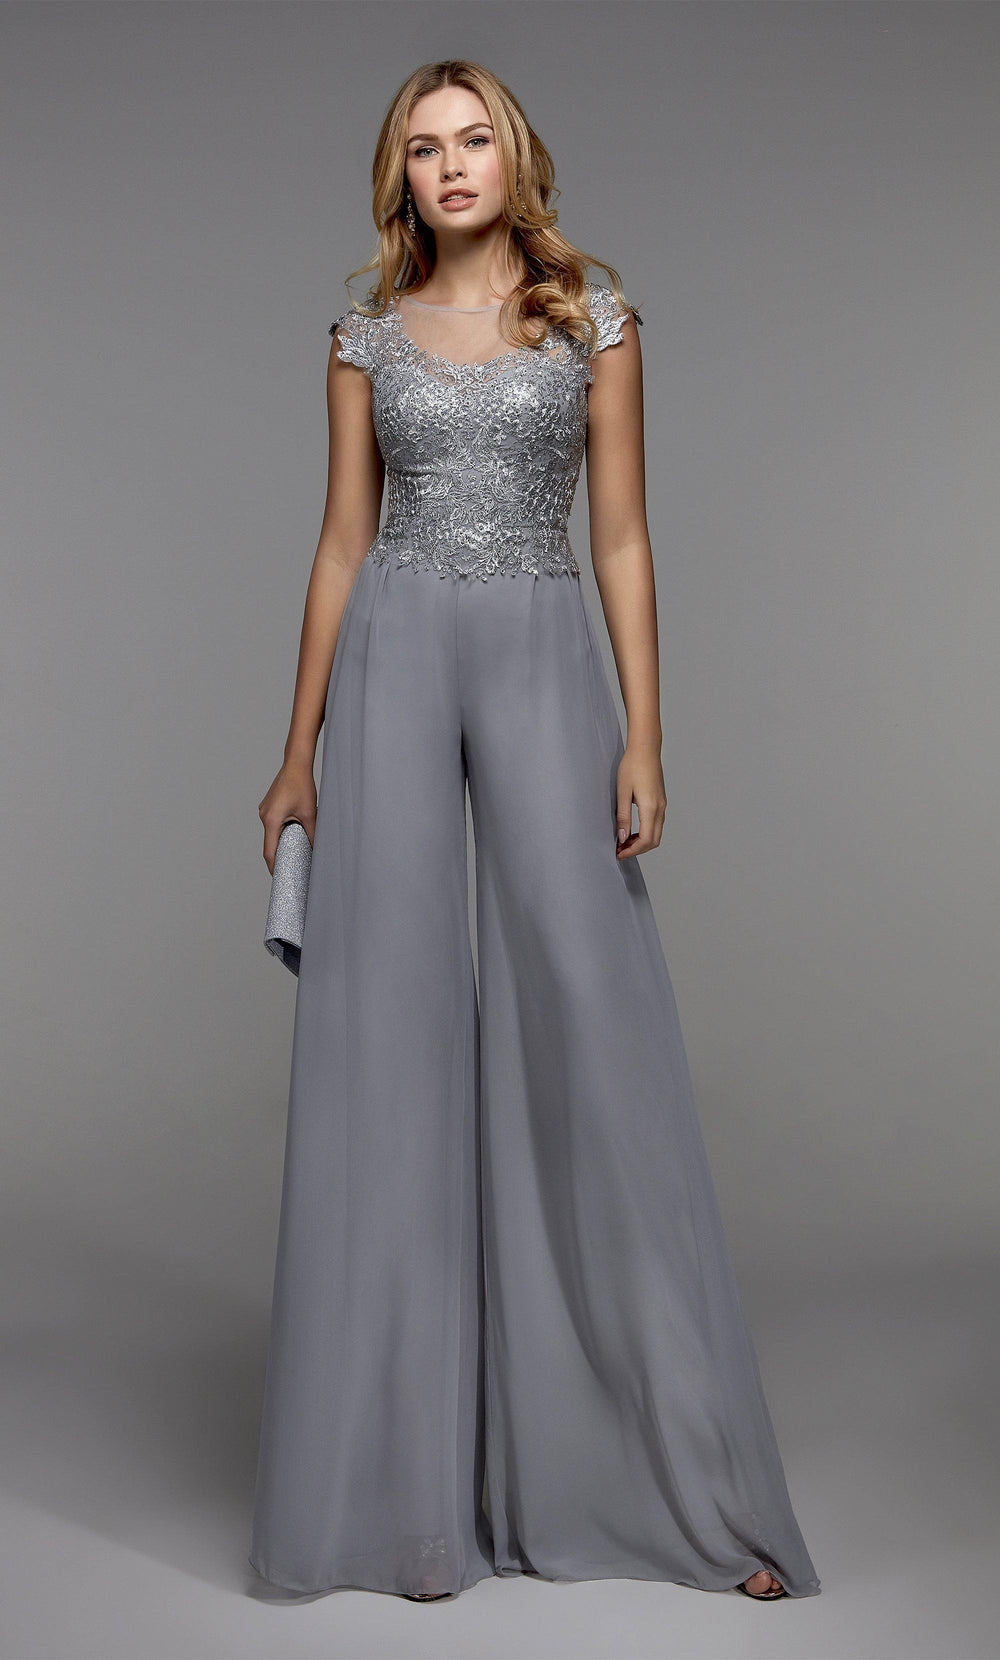 Chic Grey Chiffon Evening Jumpsuits With Sleeves For Mother Of The Bride  Perfect For Vestidos De Boda Invitada And Madrina Wear From Wevens, $112.17